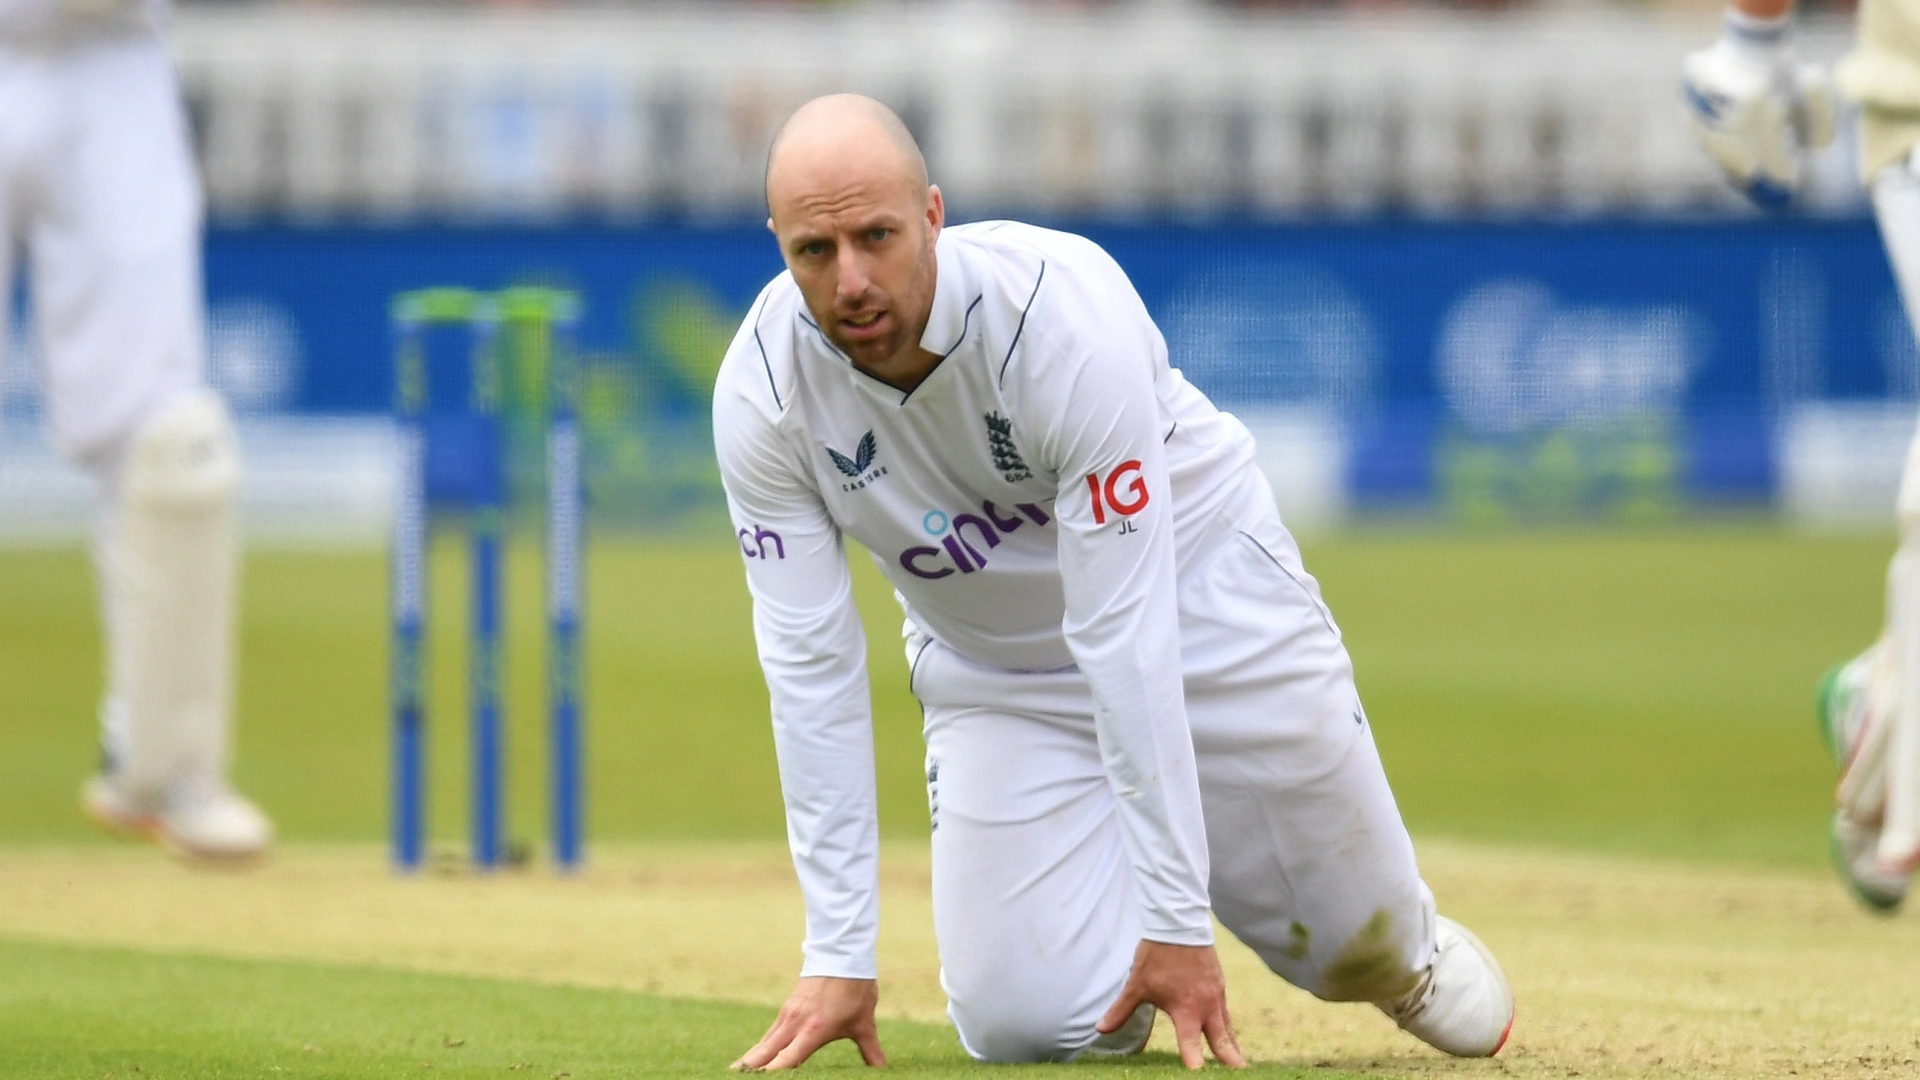 Jack Leach ruled out of Ashes as England dealt another injury blow